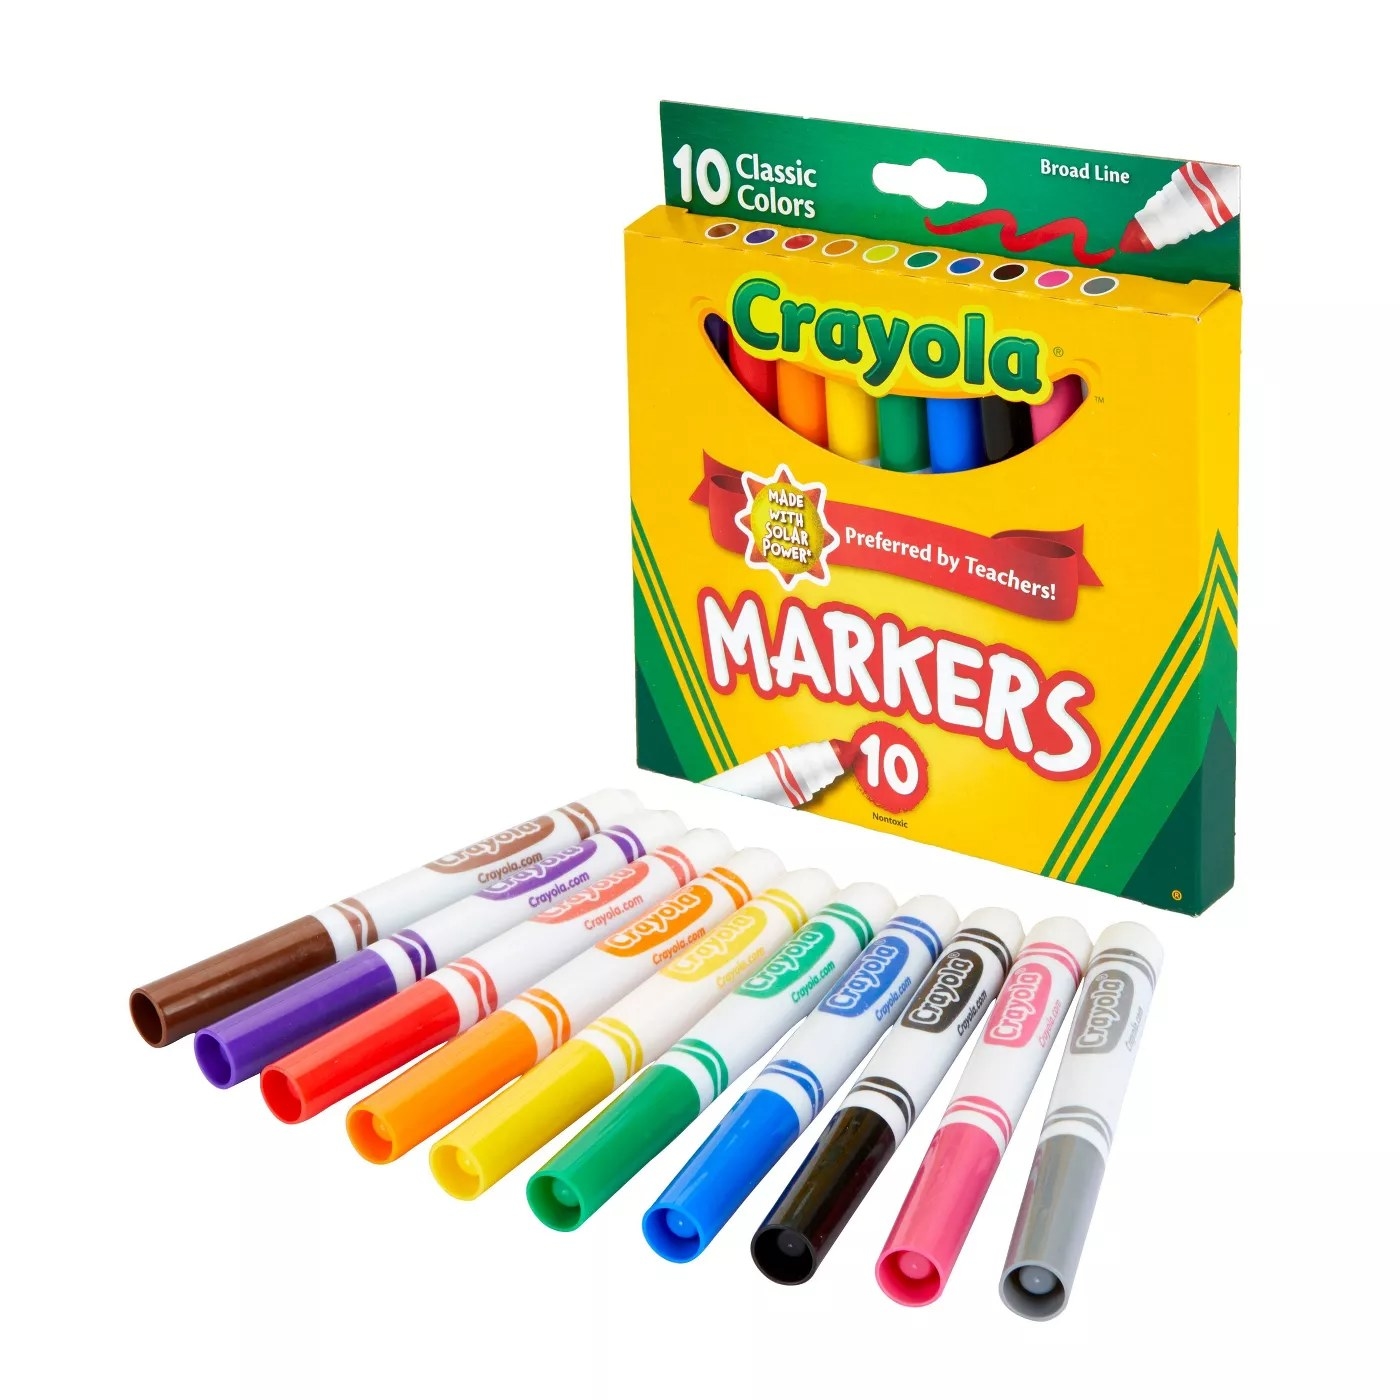 The 10 markers